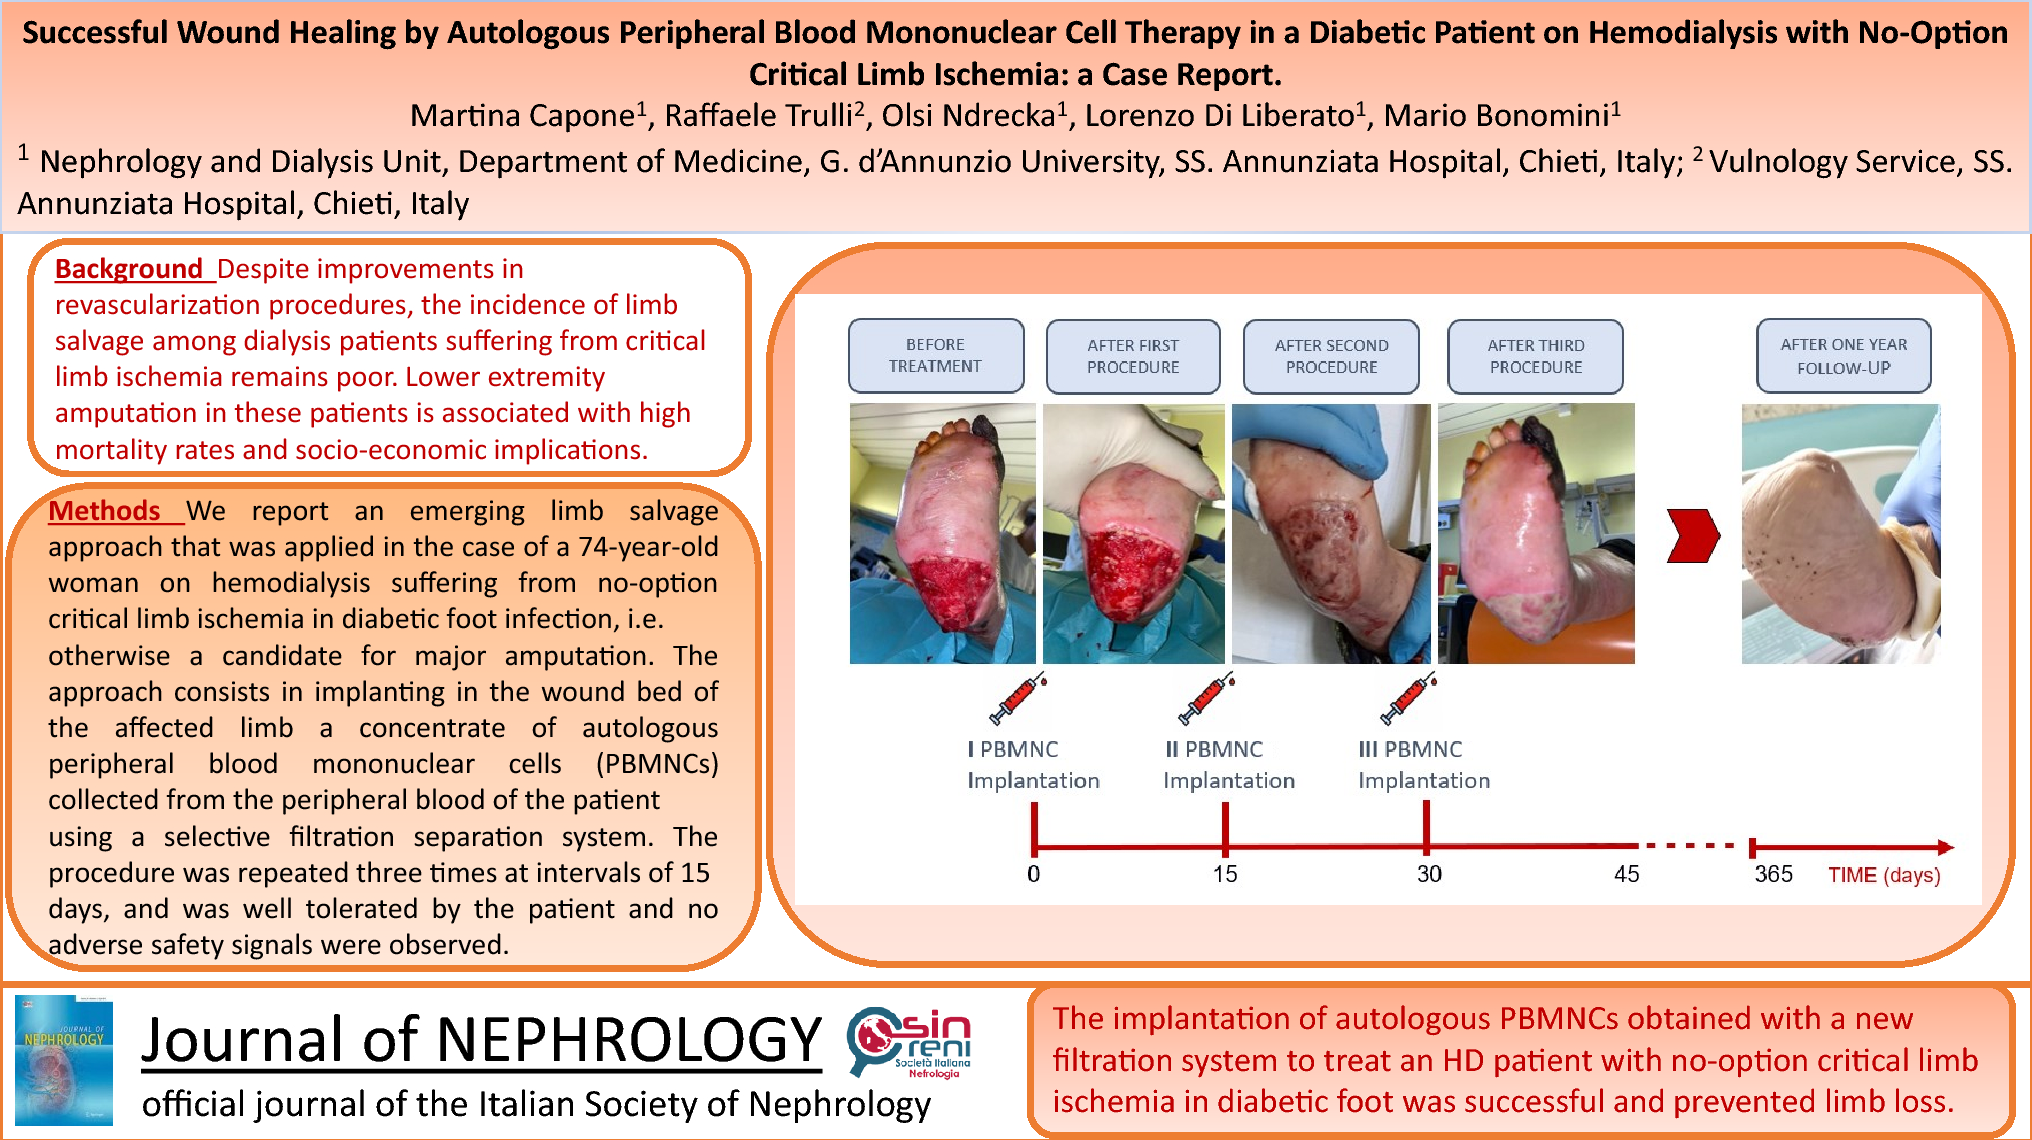 Successful wound healing by autologous peripheral blood mononuclear cell therapy in a diabetic patient on hemodialysis with no-option critical limb ischemia: a case report